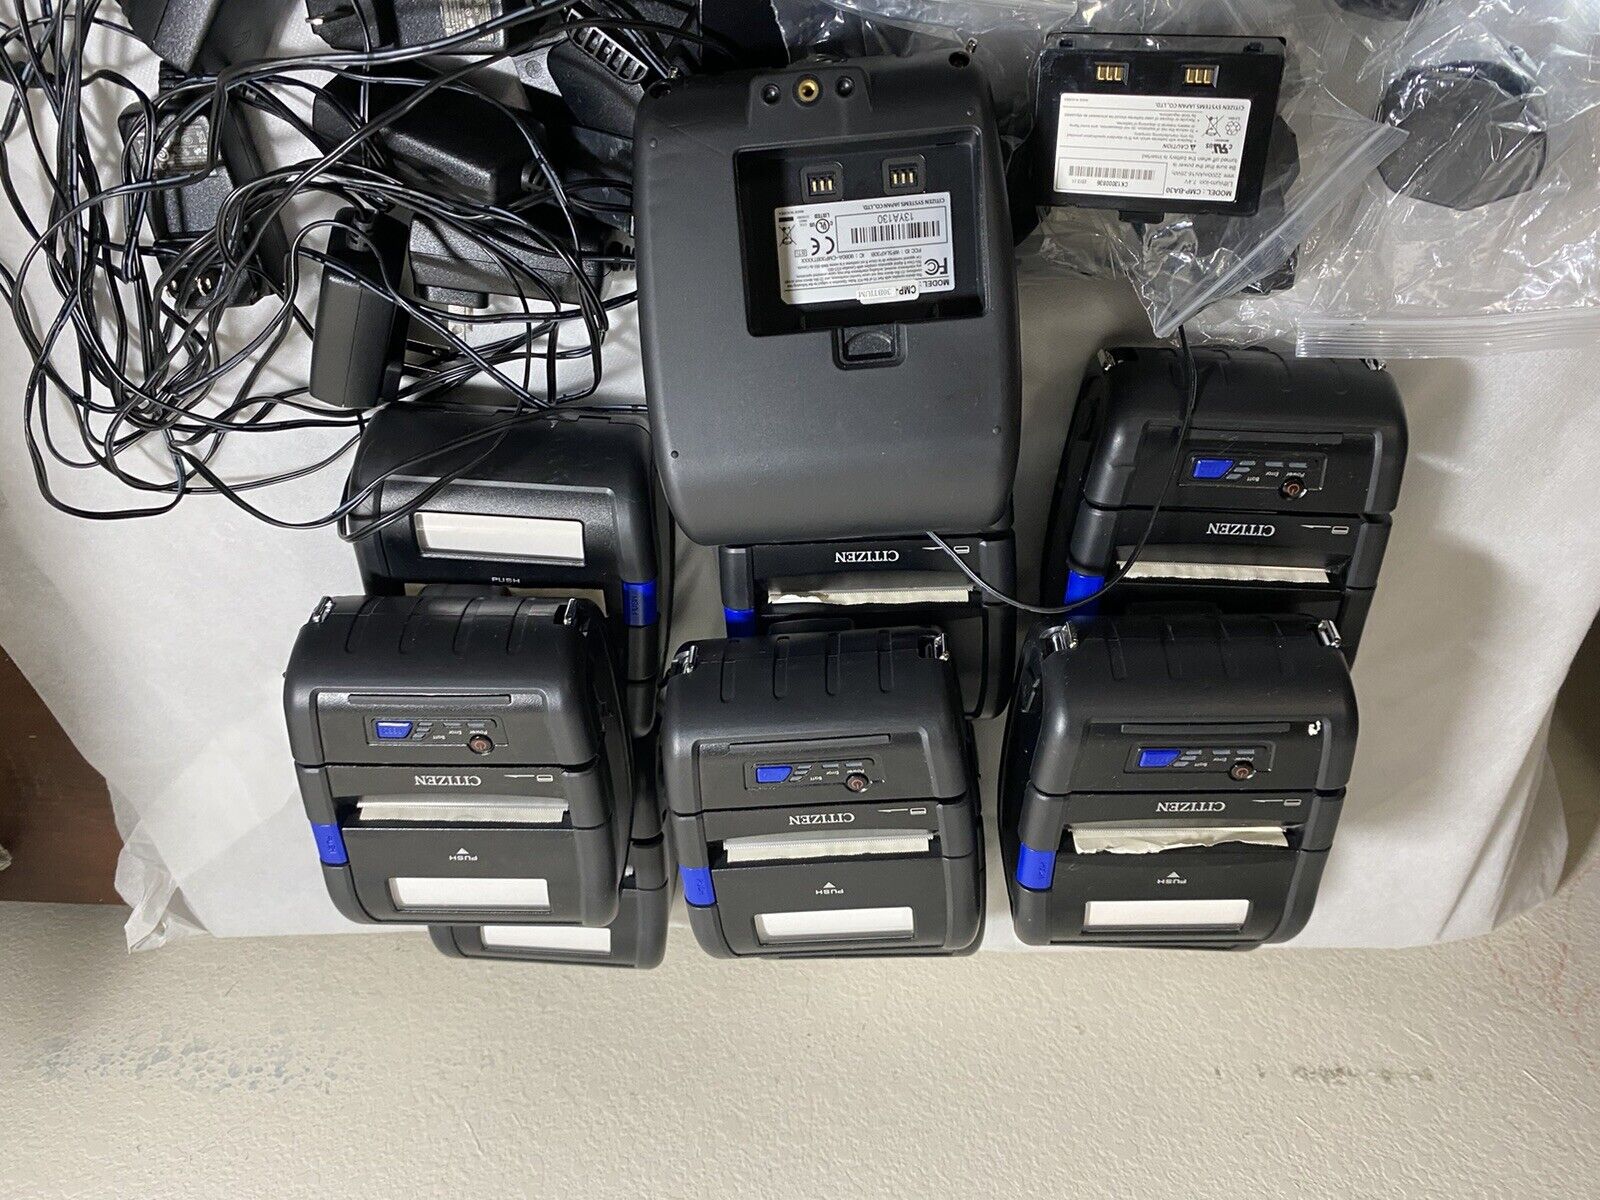 Lot of 10 Citizen CMP-30BT Thermal Mobile Receipt/Barcode Printer W/OEM Adapter